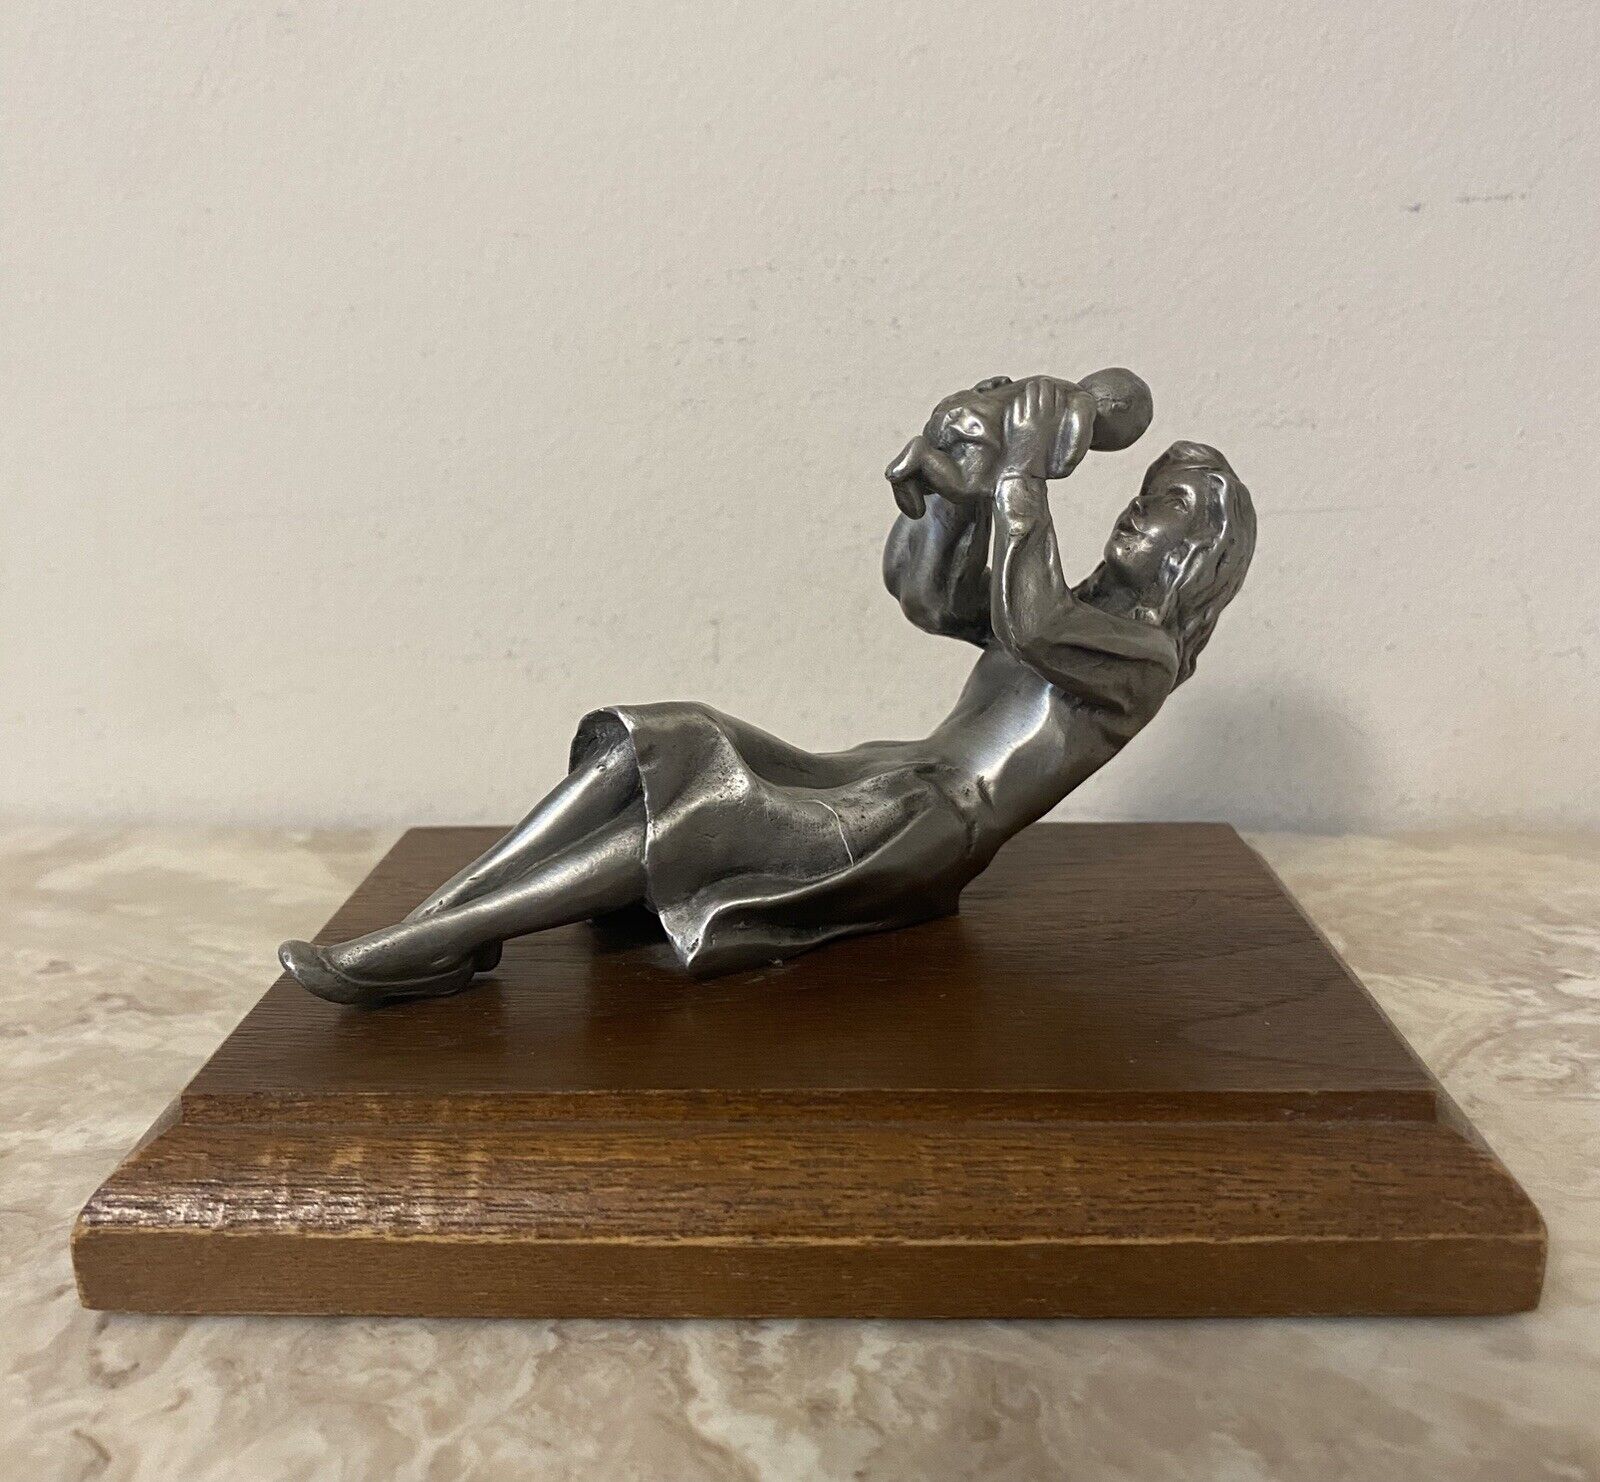 Mother’s Day Pewter Sculpture 301/2500 Signed By Artist Mother Baby Figurine